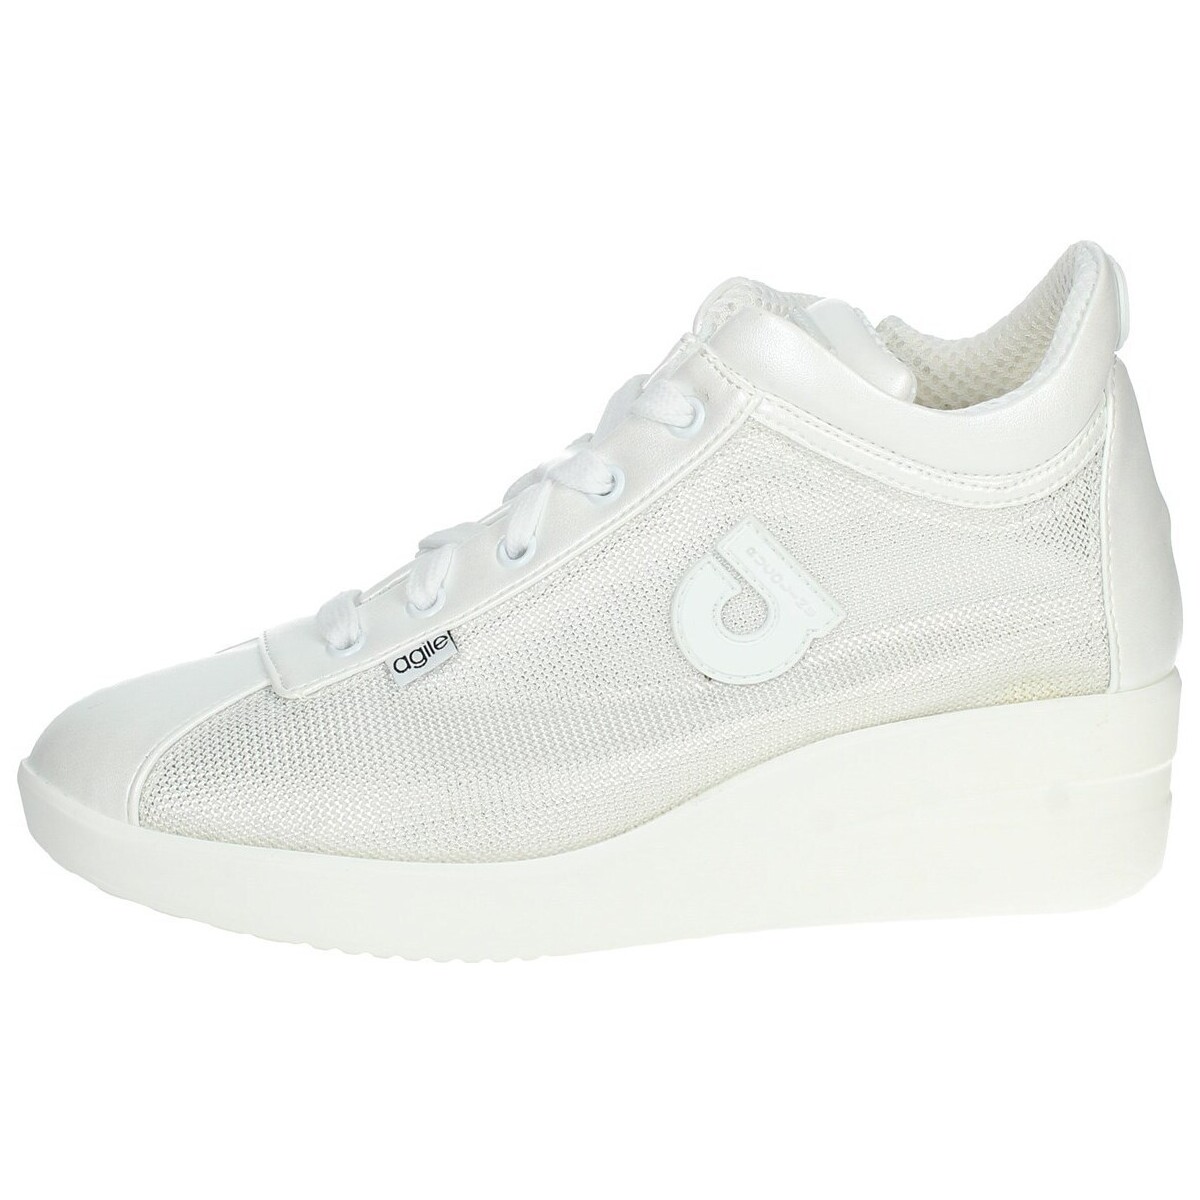 Chaussures Femme Baskets montantes Agile By Ruco Line JACKIE DRAGON 226 Blanc